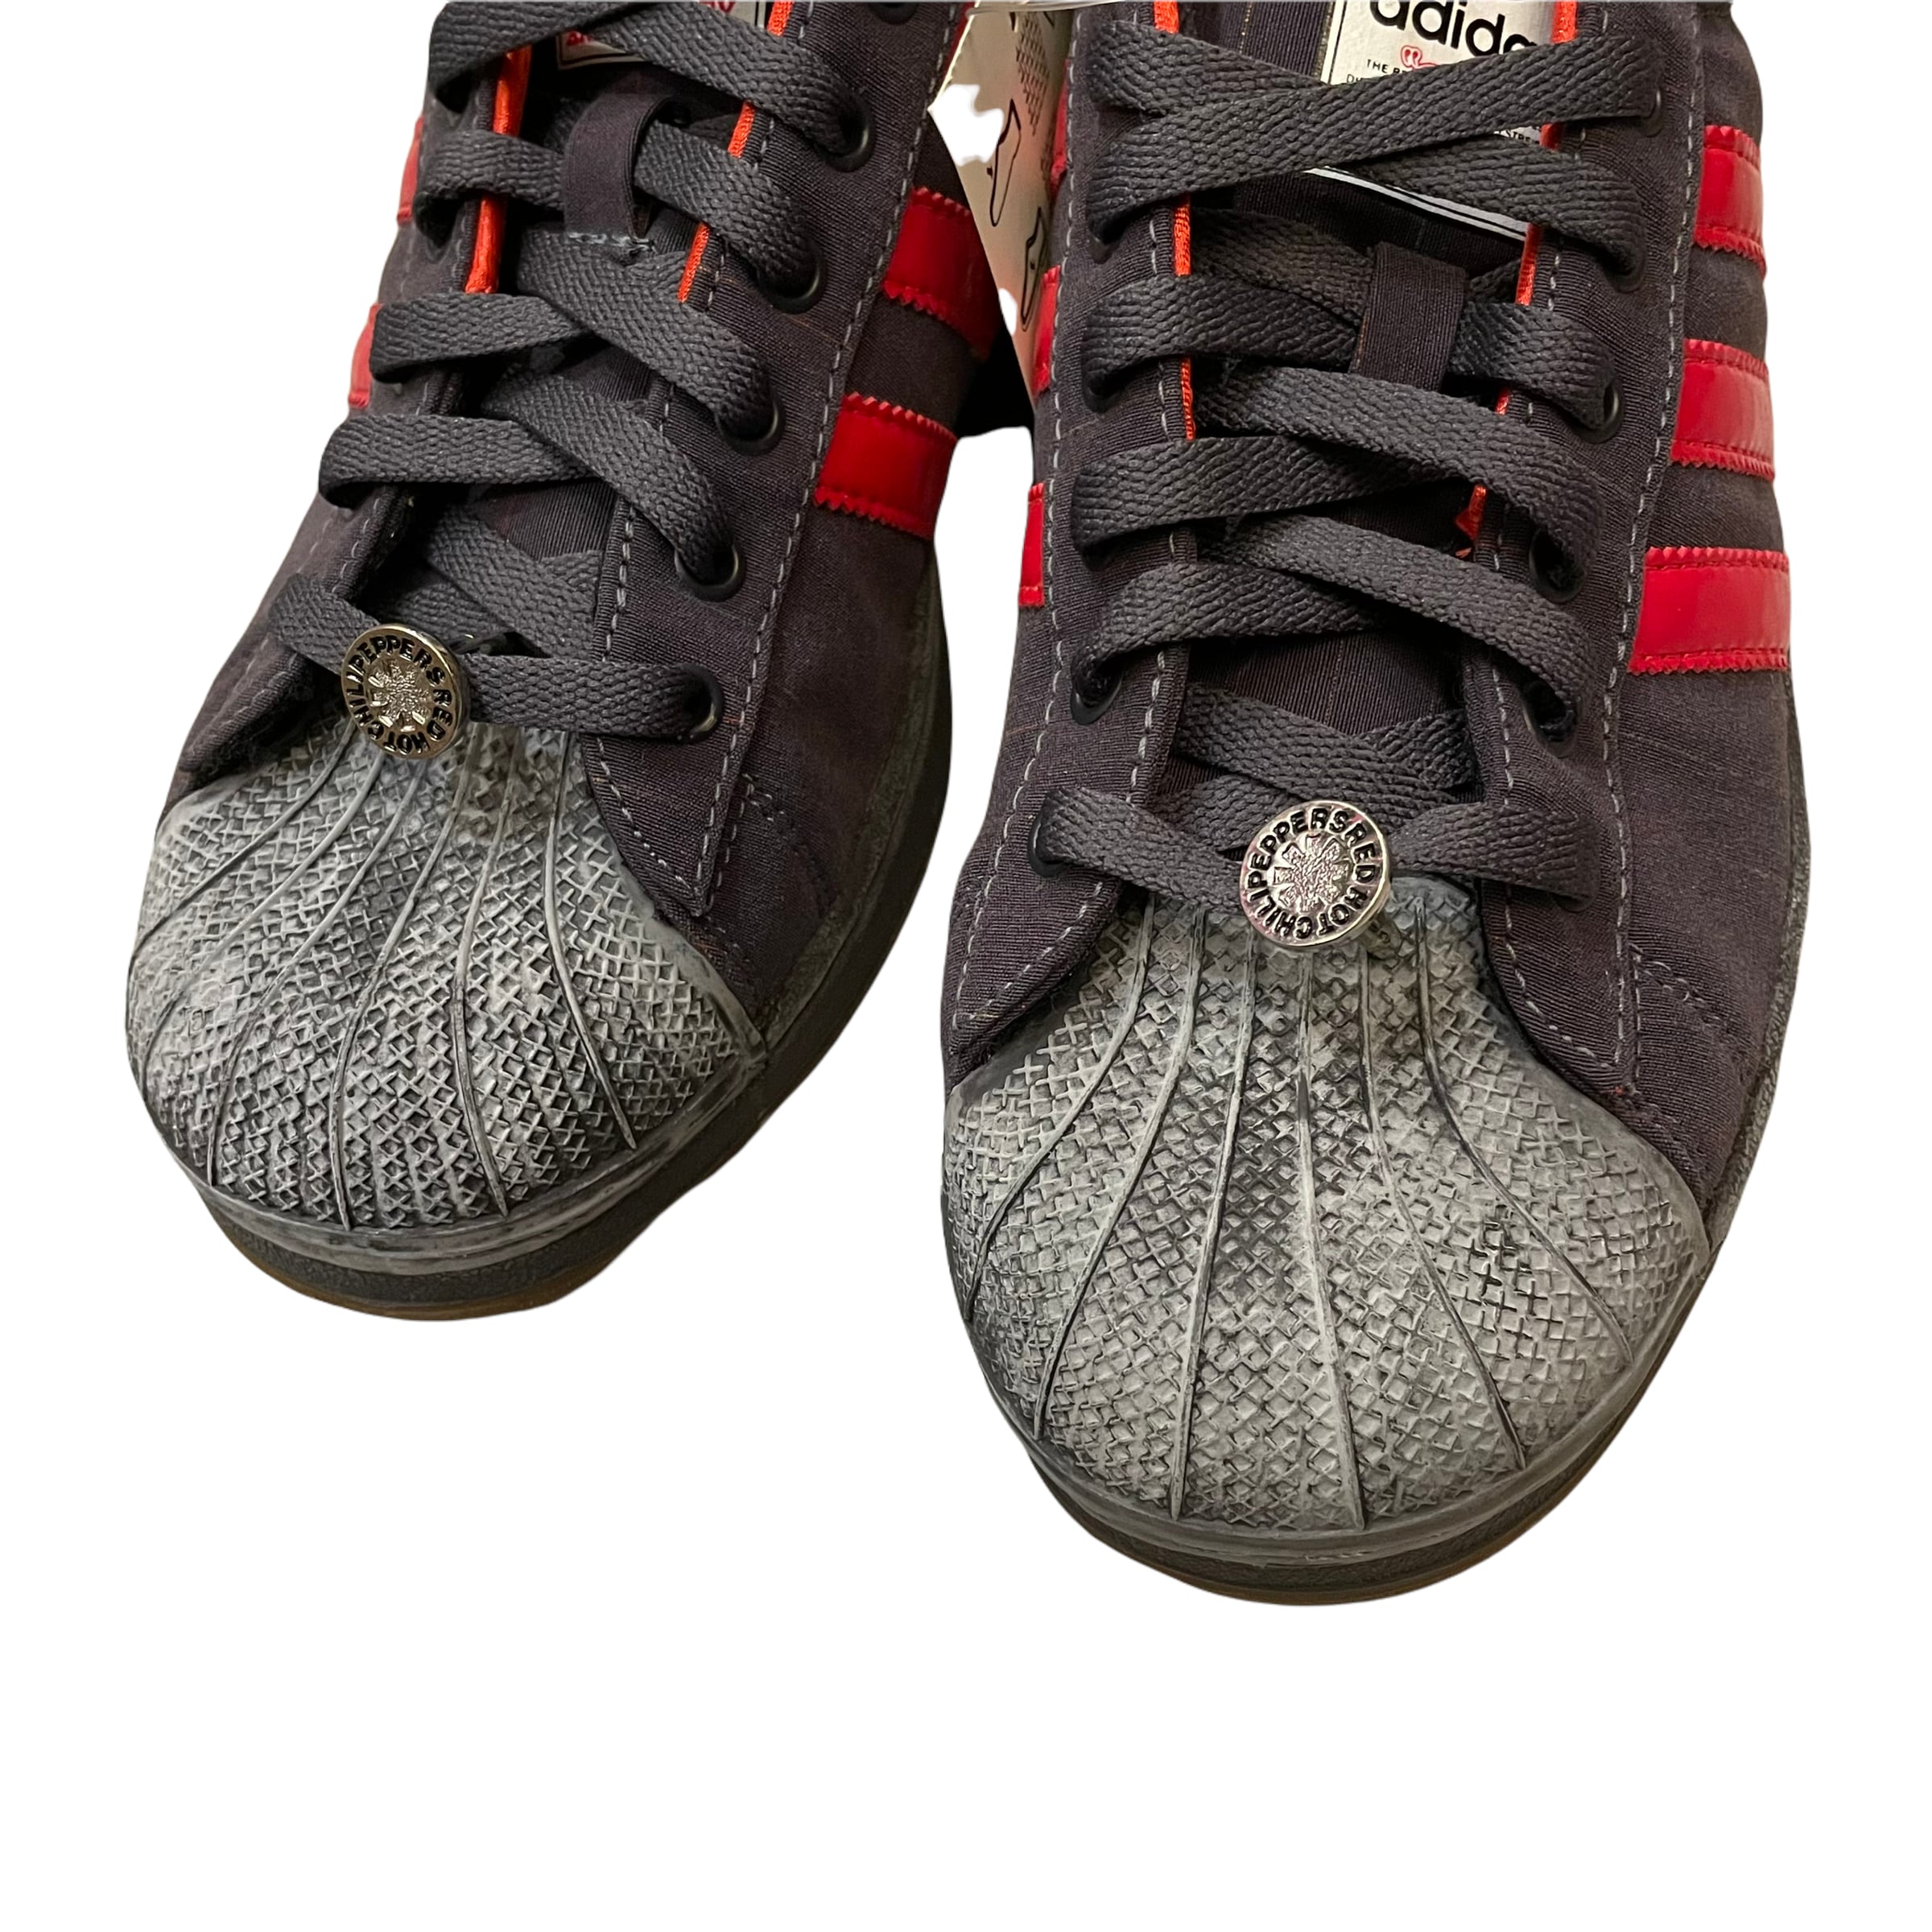 adidas superstar 35th anniversary × RED HOT CHILI PEPPERS | THE SHOP URL